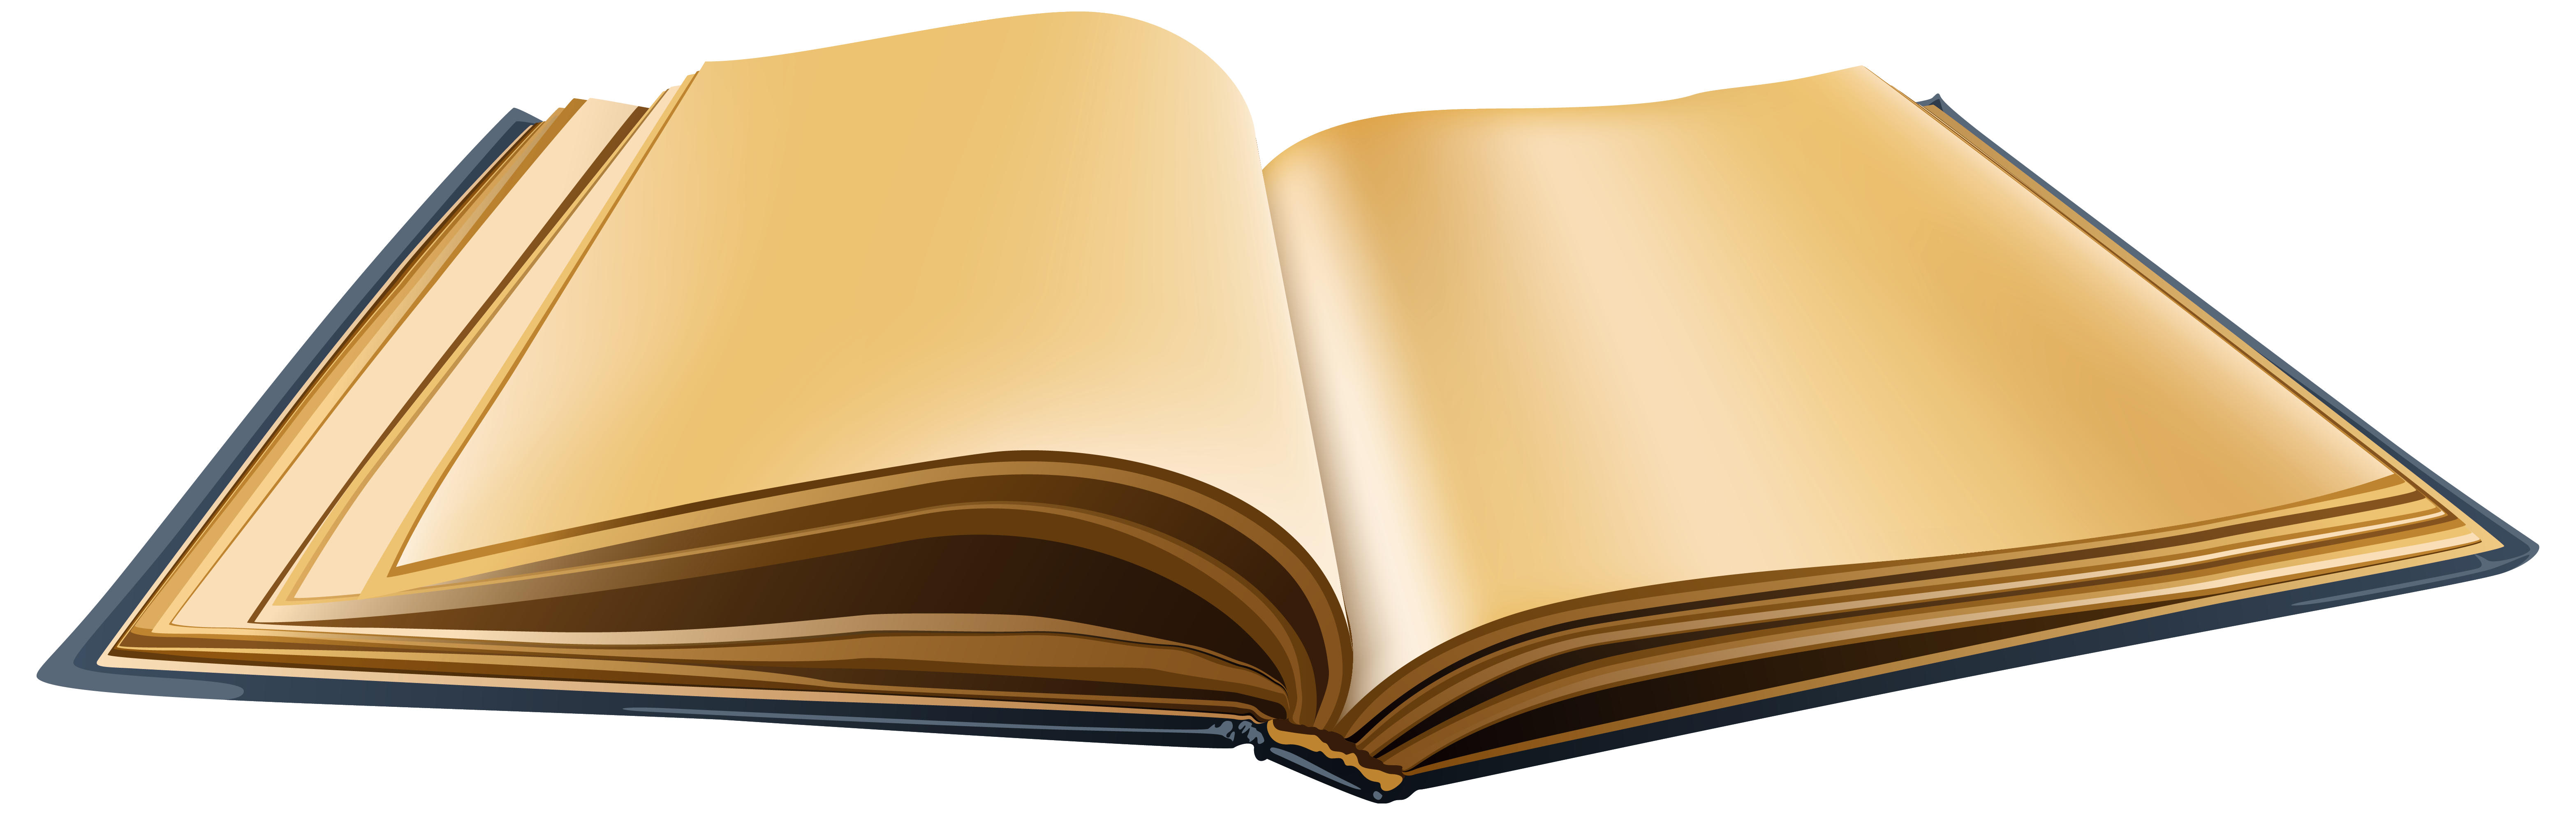 books clipart png - photo #11